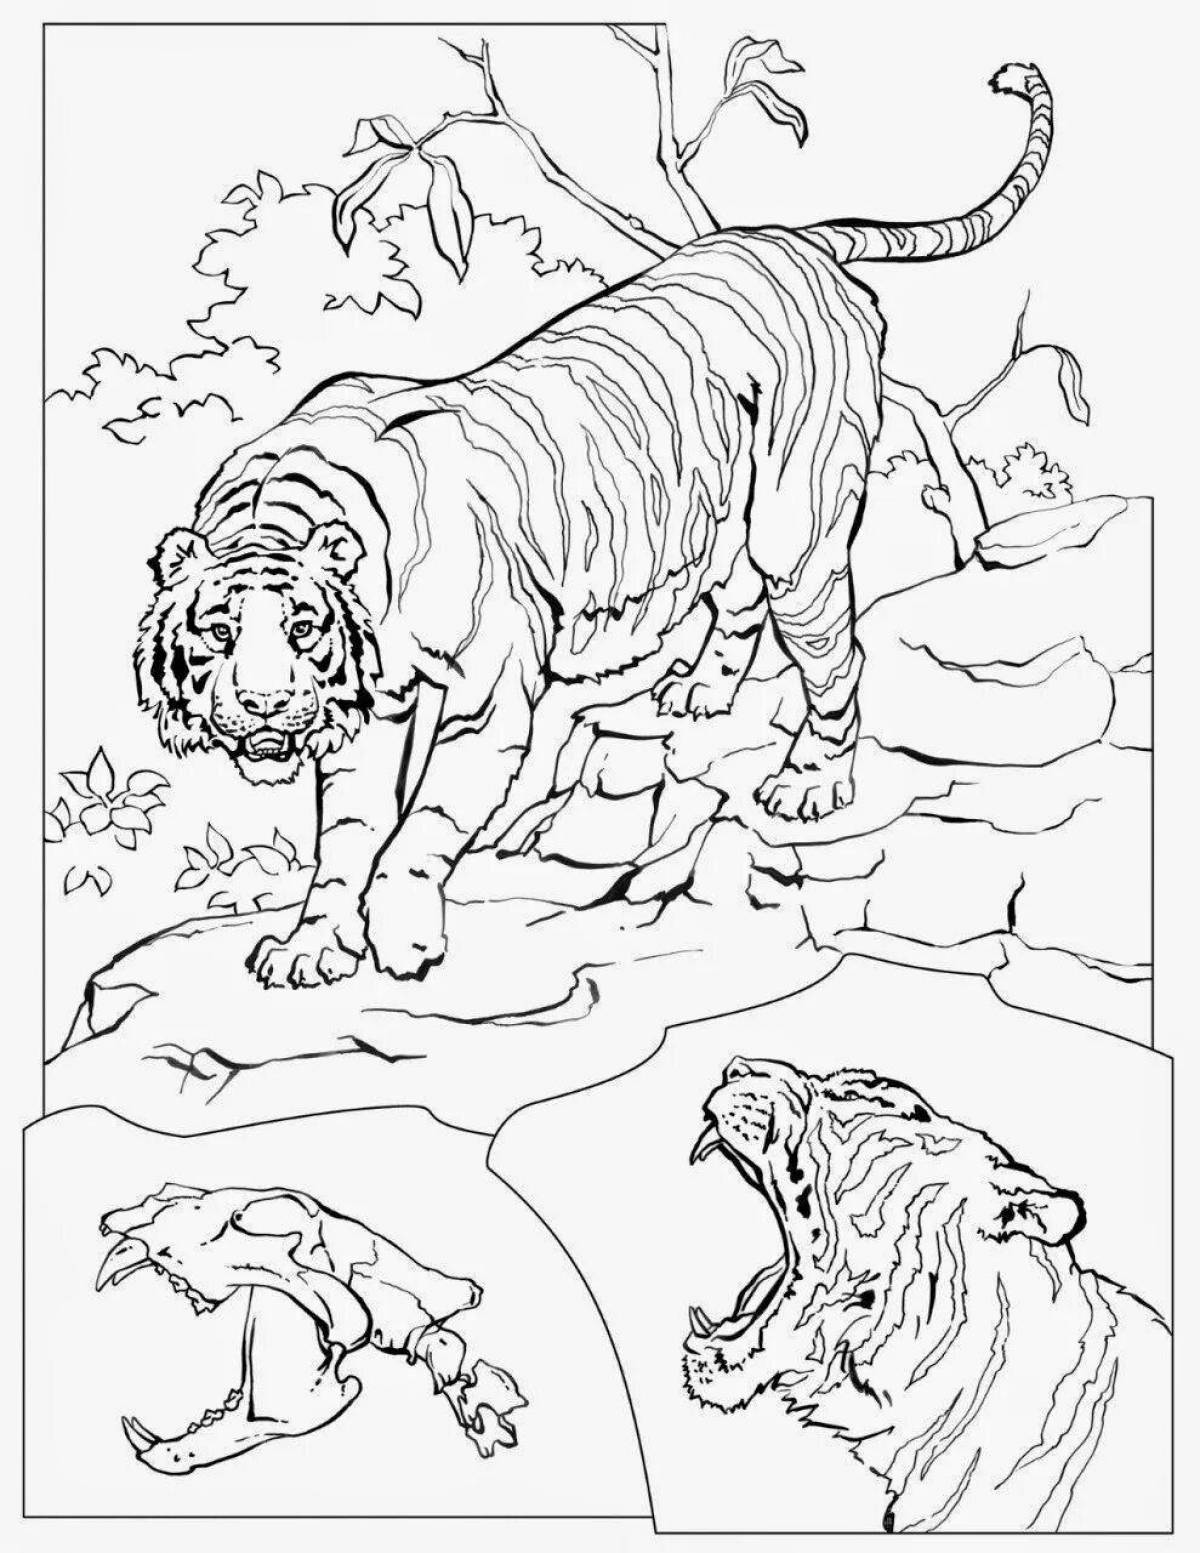 Terrific tiger coloring page